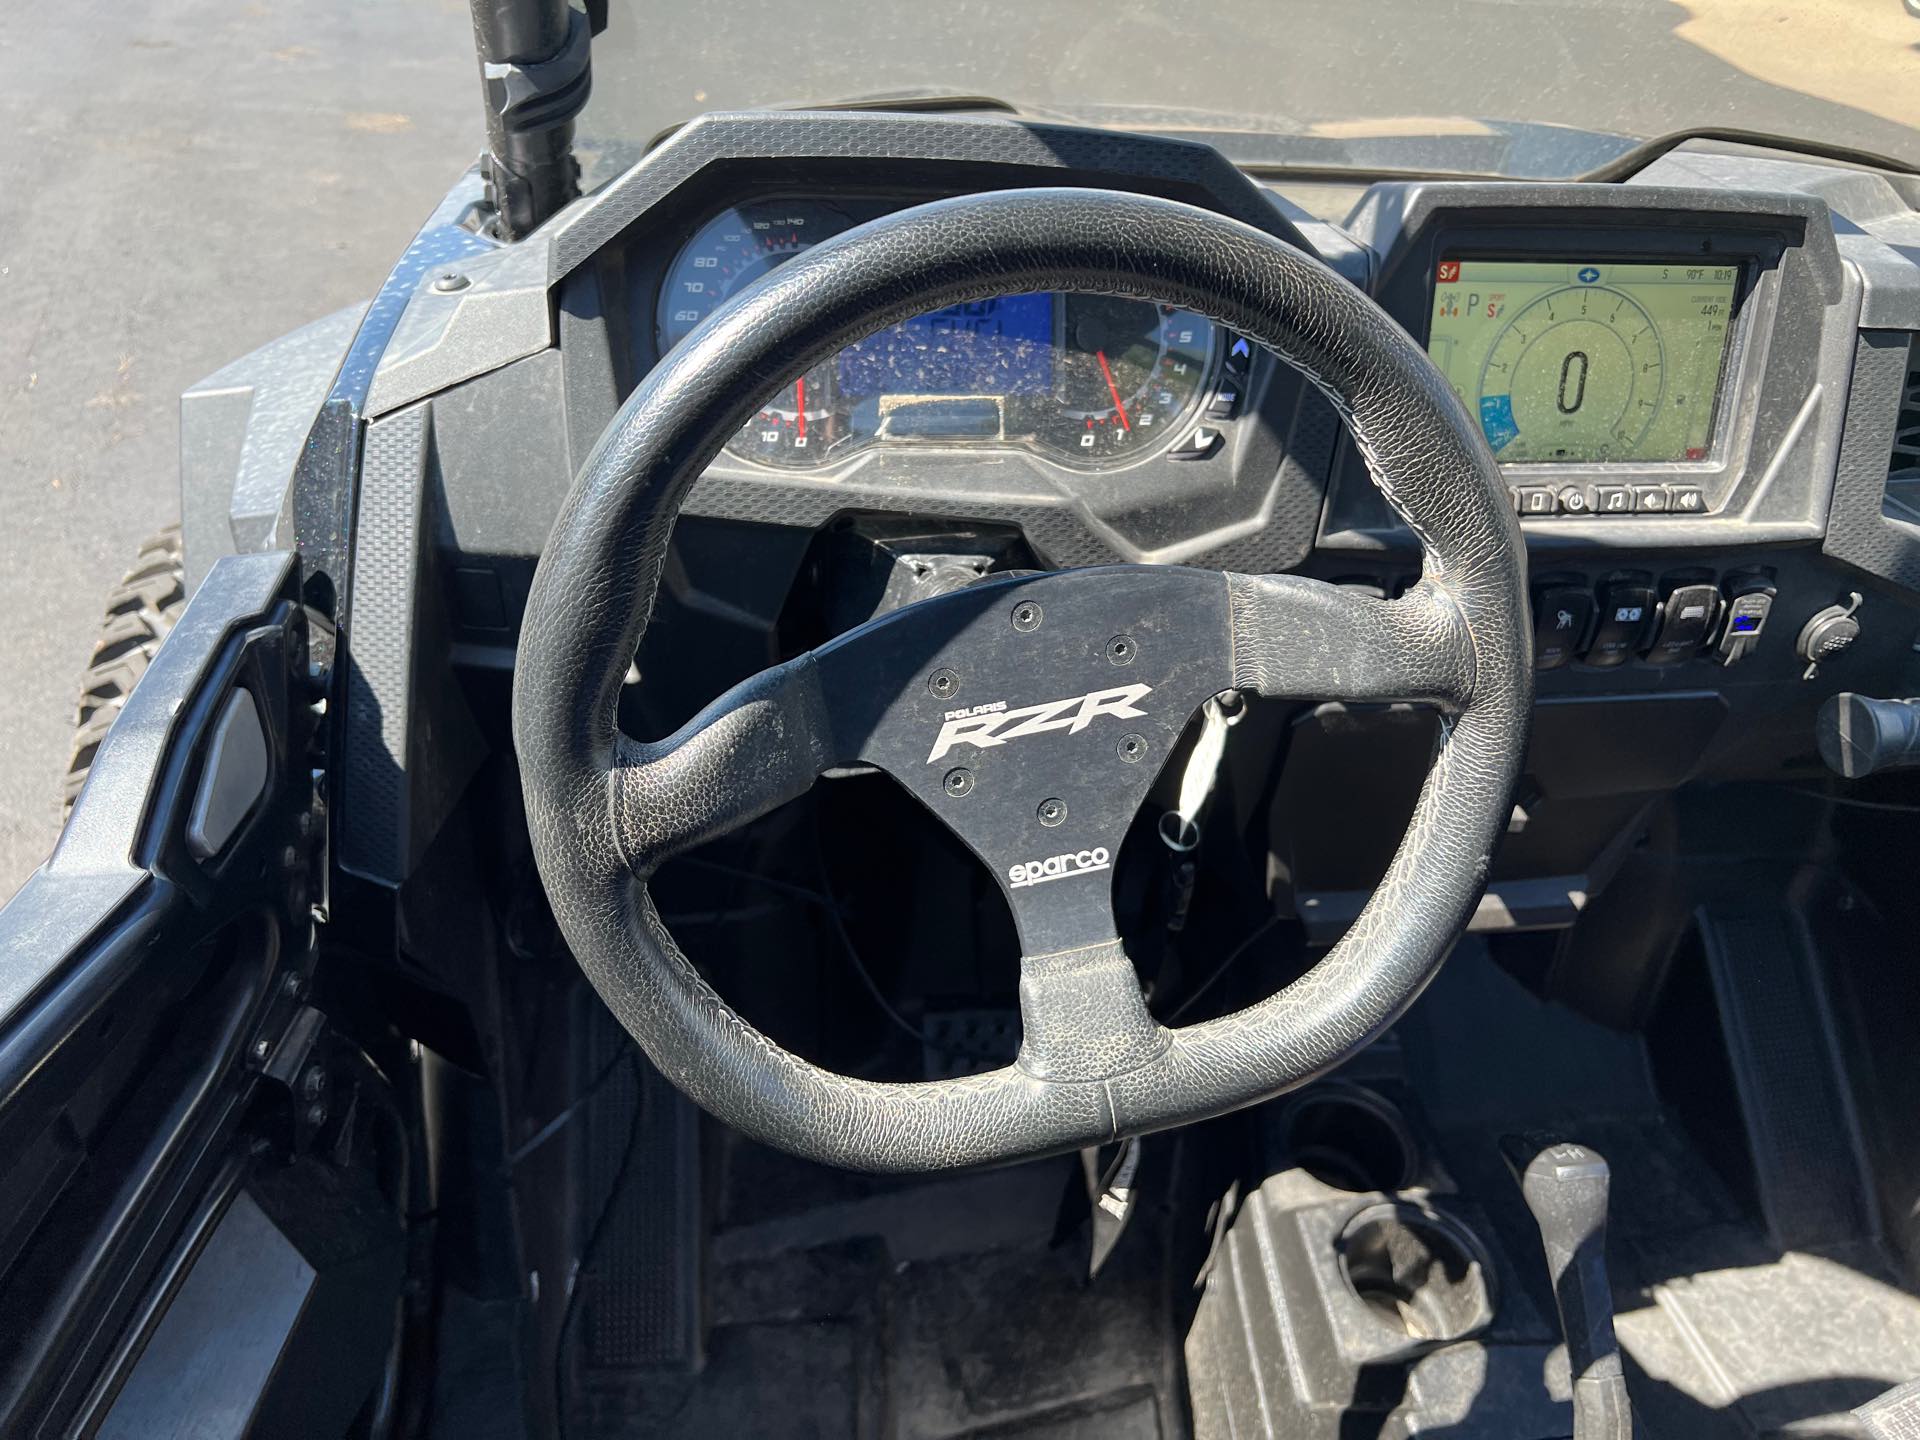 2019 Polaris RZR XP 4 Turbo S Base at Aces Motorcycles - Fort Collins